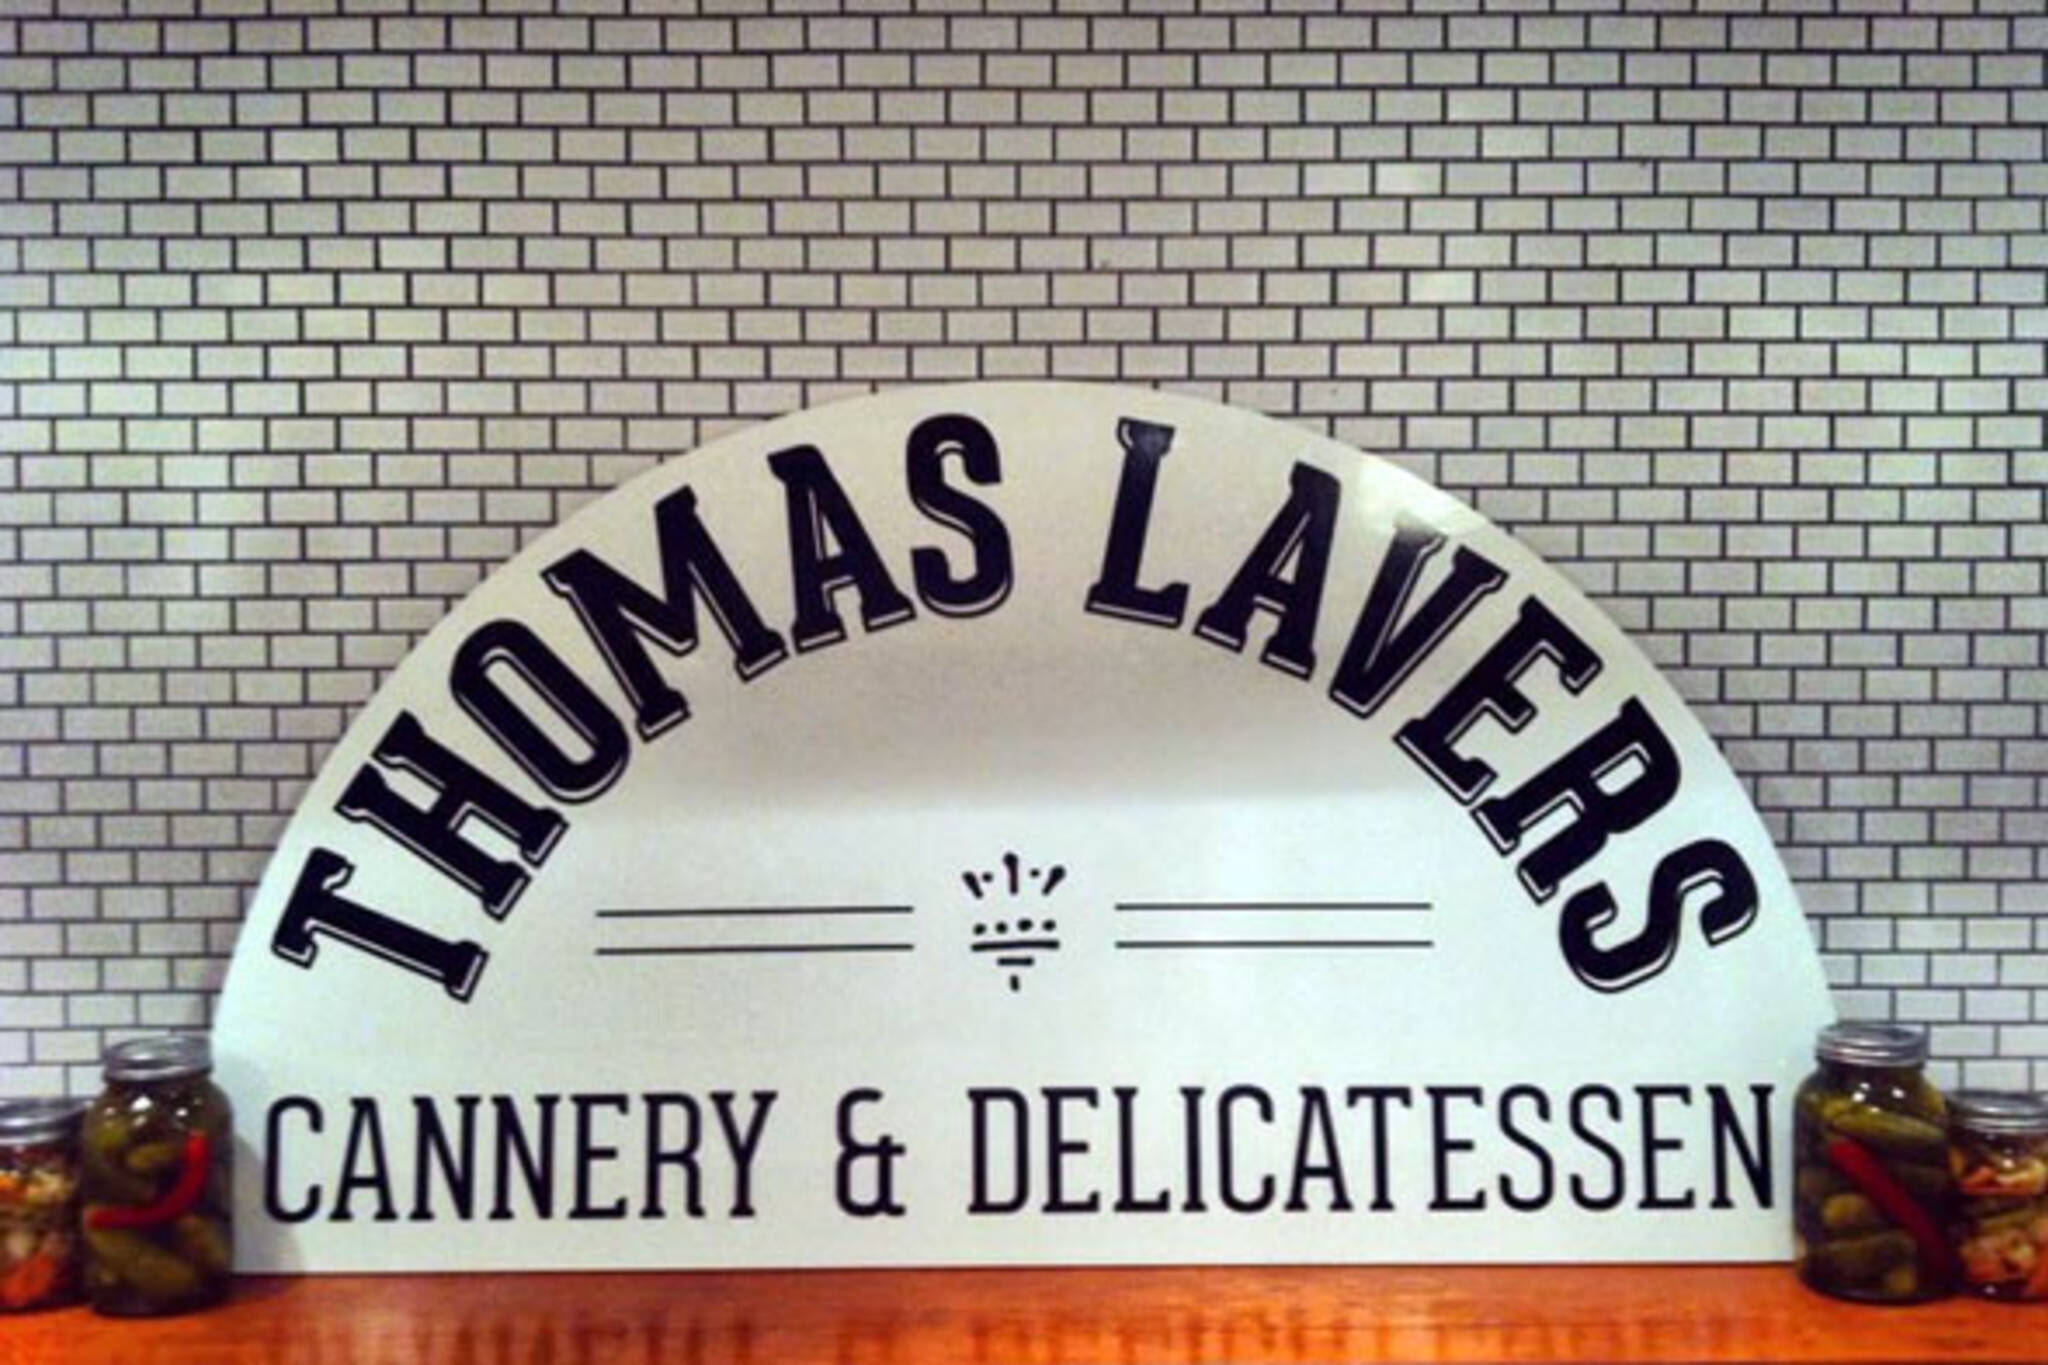 Thomas Lavers Cannery